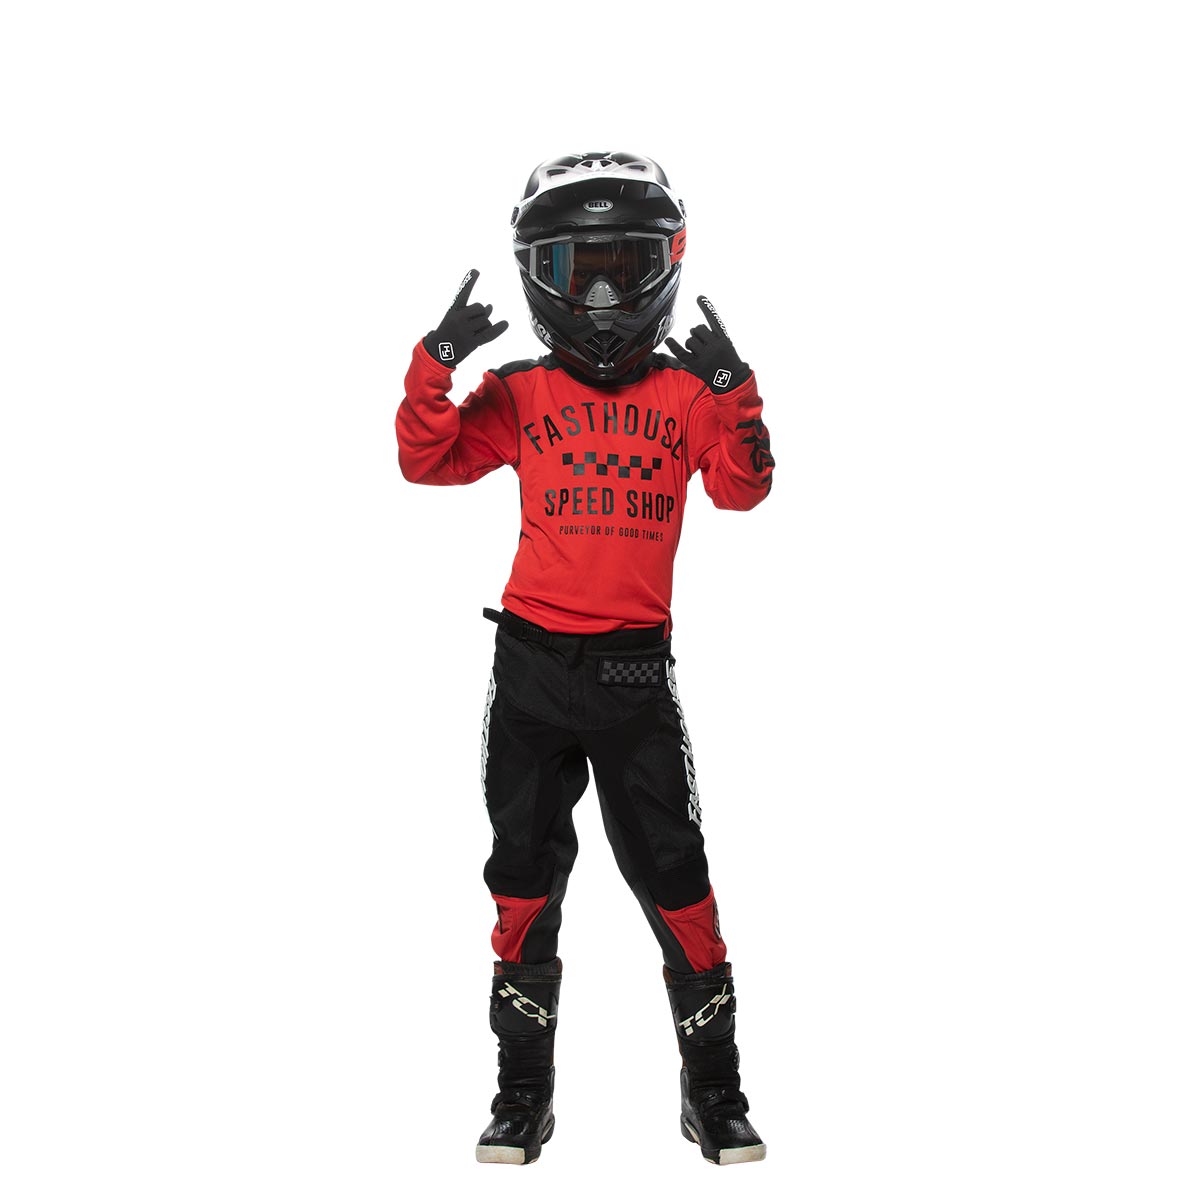 Carbon Youth Jersey - Red/Black